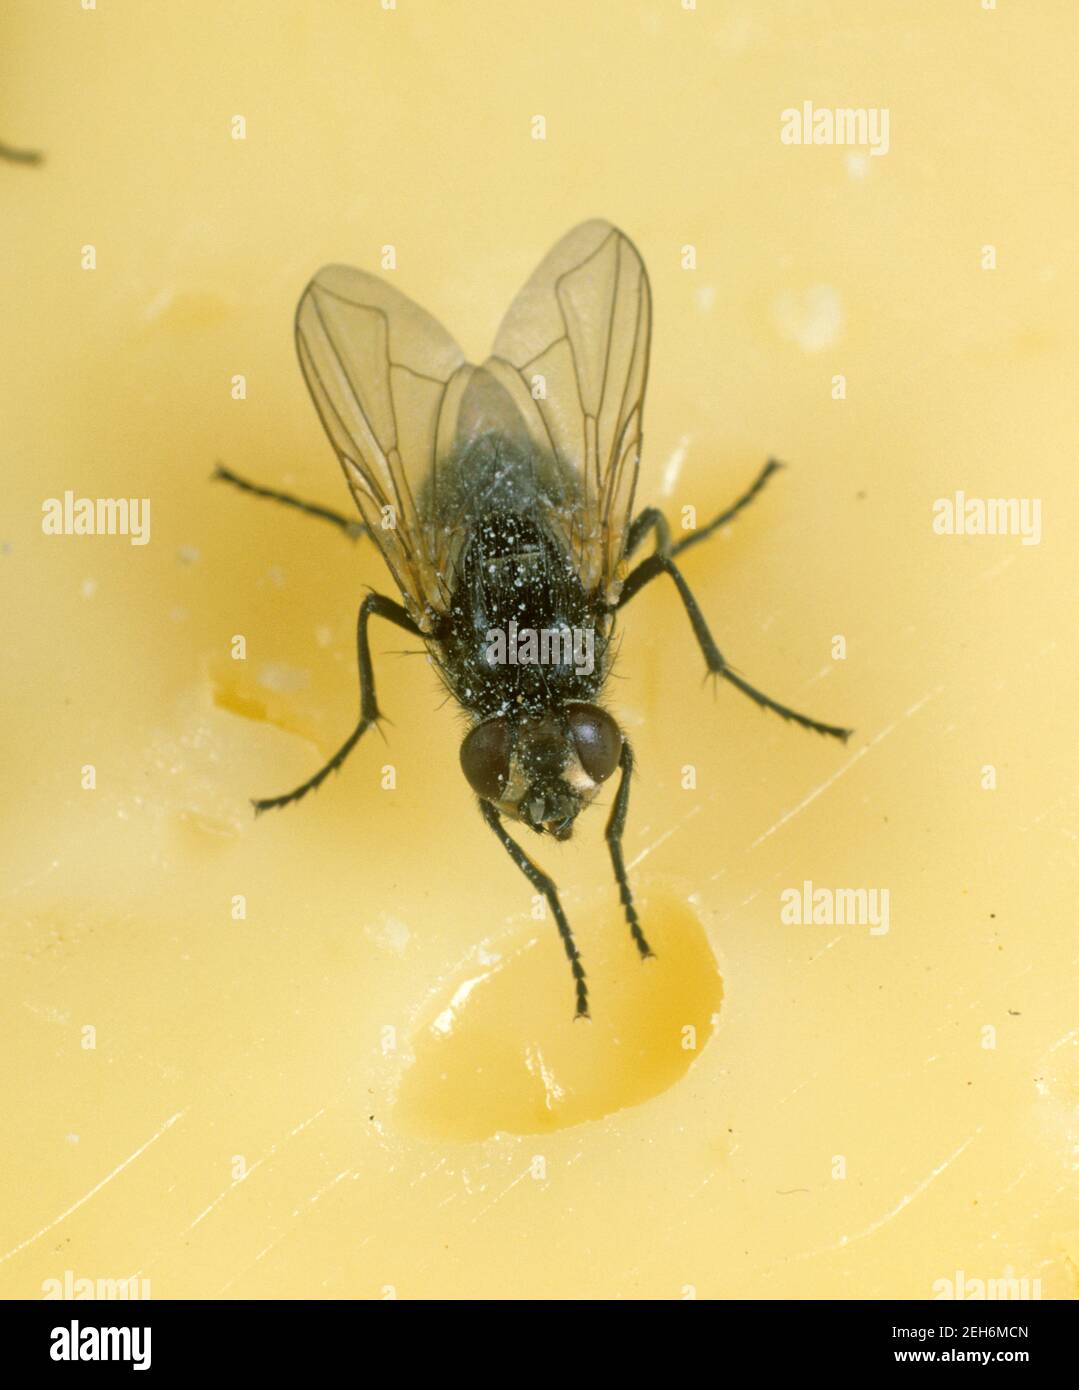 House fly (Musca domestica) adult public health pest on cheese, kitchen hygiene Stock Photo